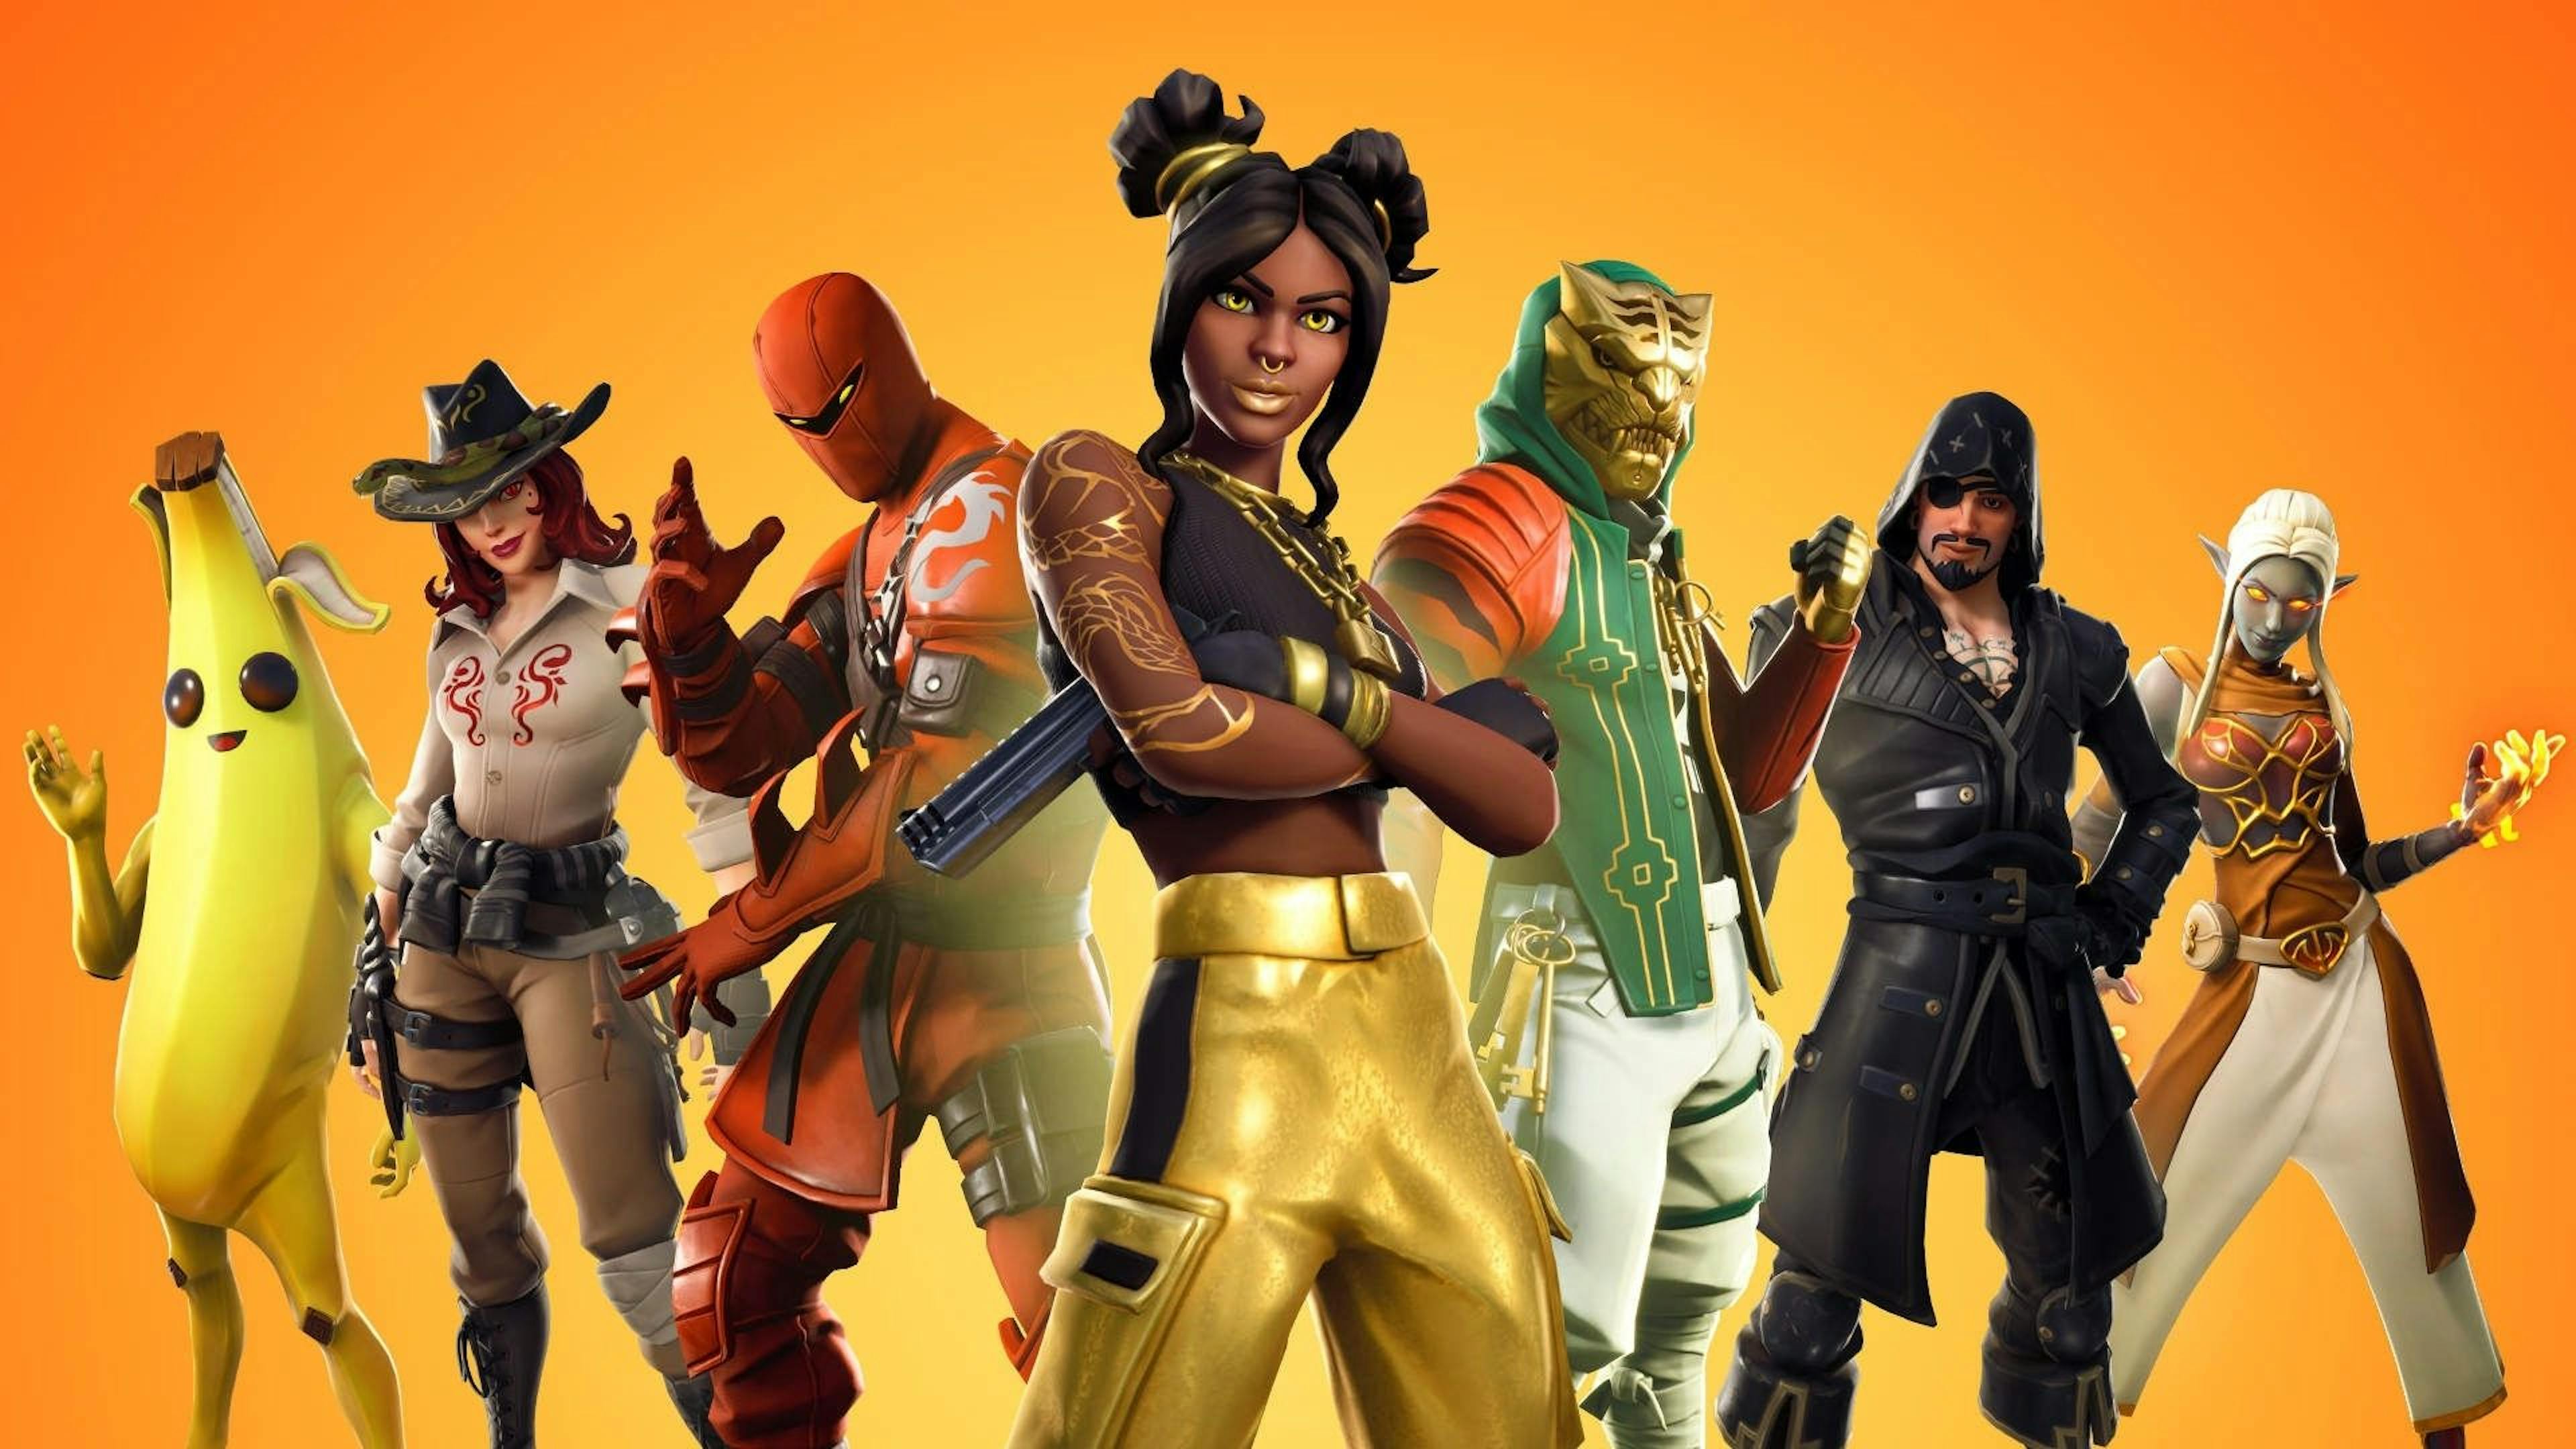 Characters from the game Fortnite